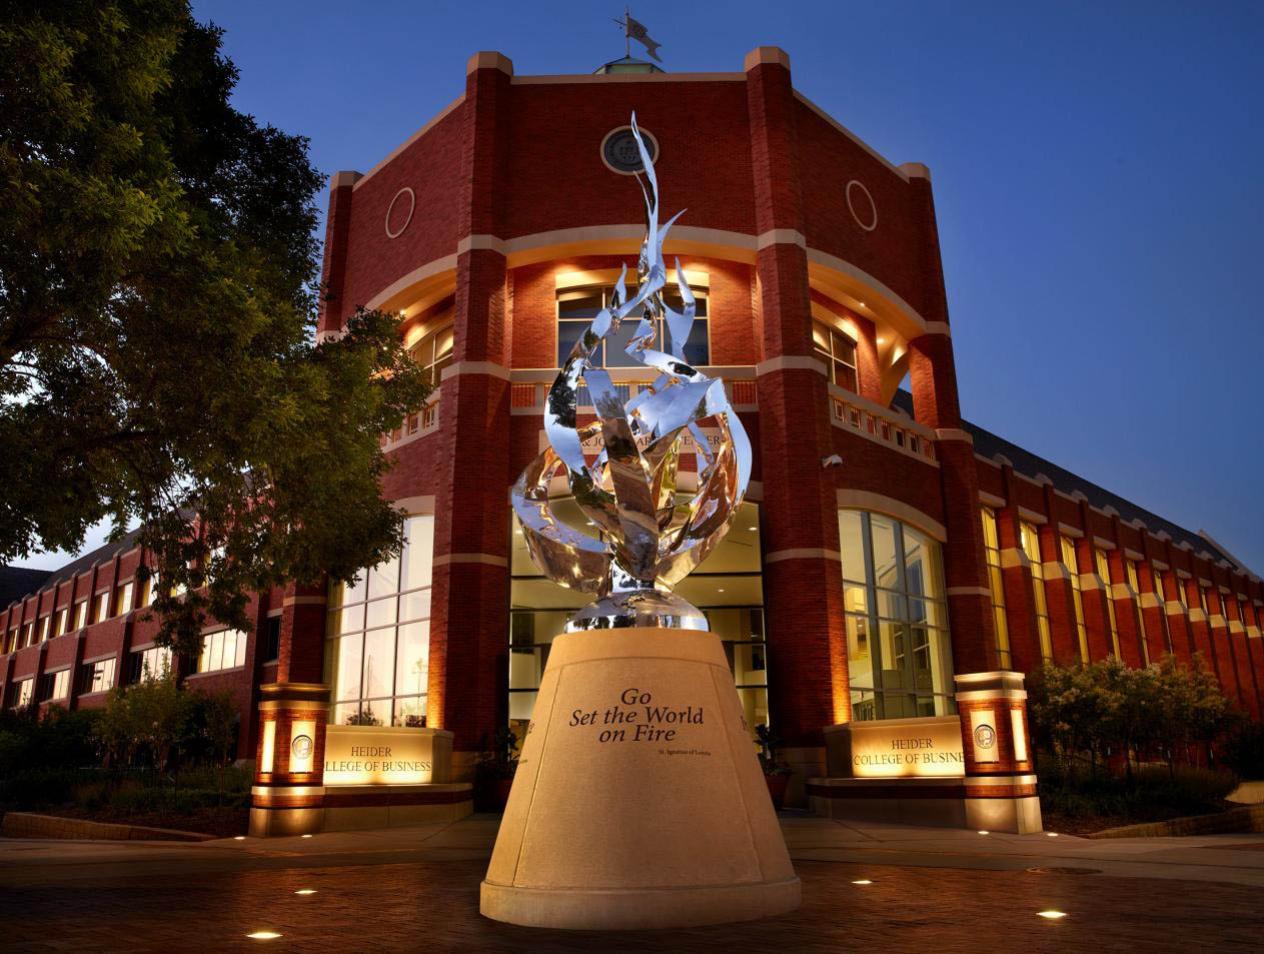 Heider-College-of-Business-flame-statue-at-night